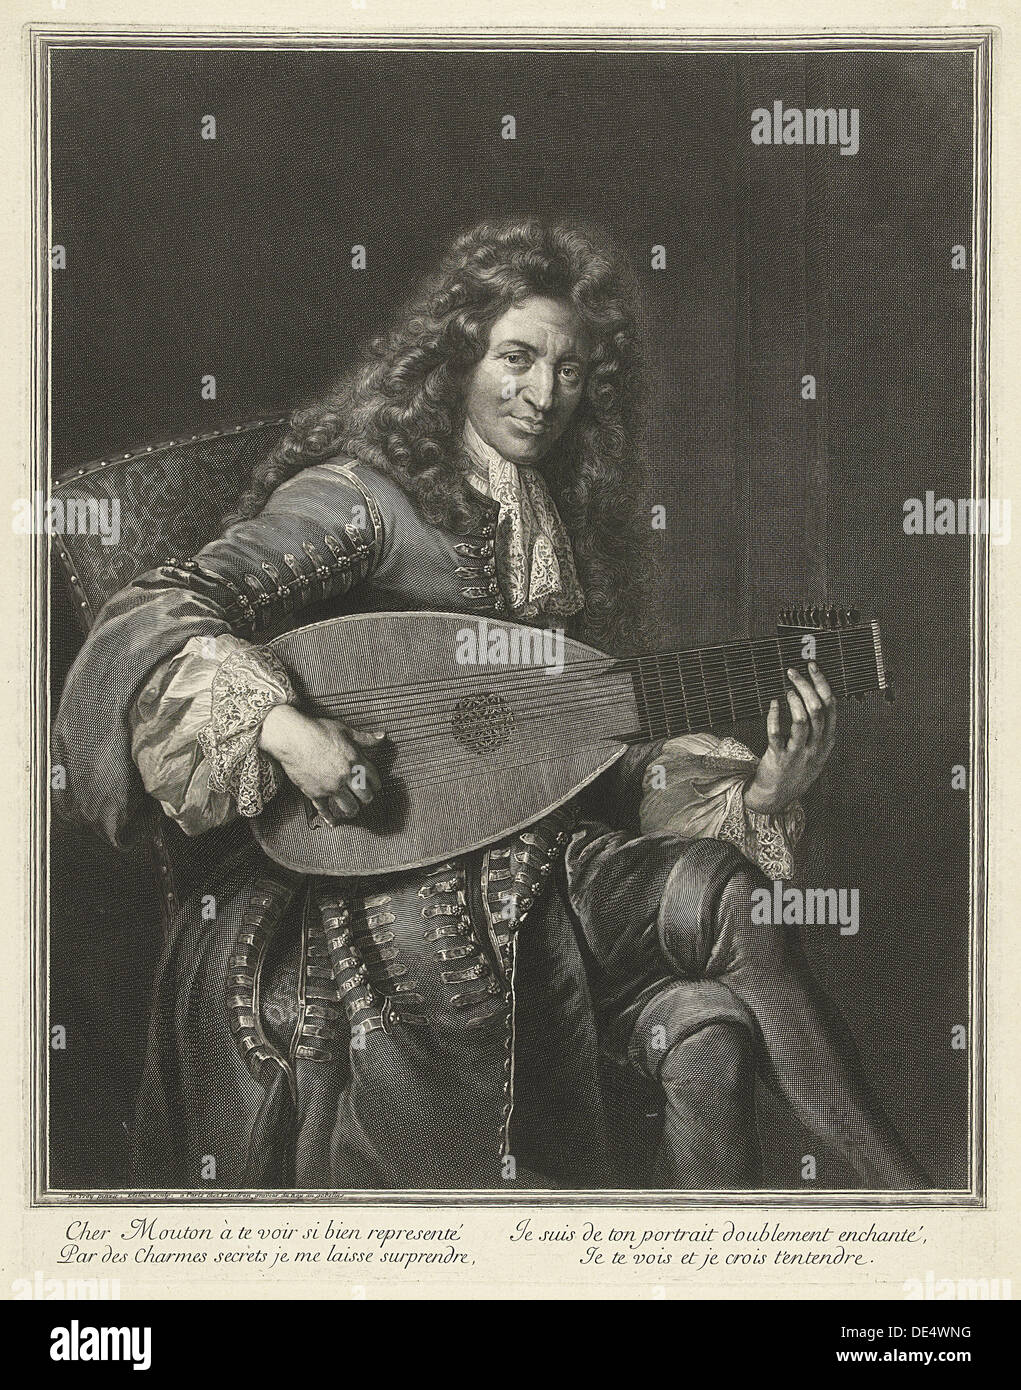 Portrait of the Lutenist and Composer Charles Mouton (c. 1626-1710), ca. 1695. Artist: Edelinck, Gerard (1640-1707) Stock Photo